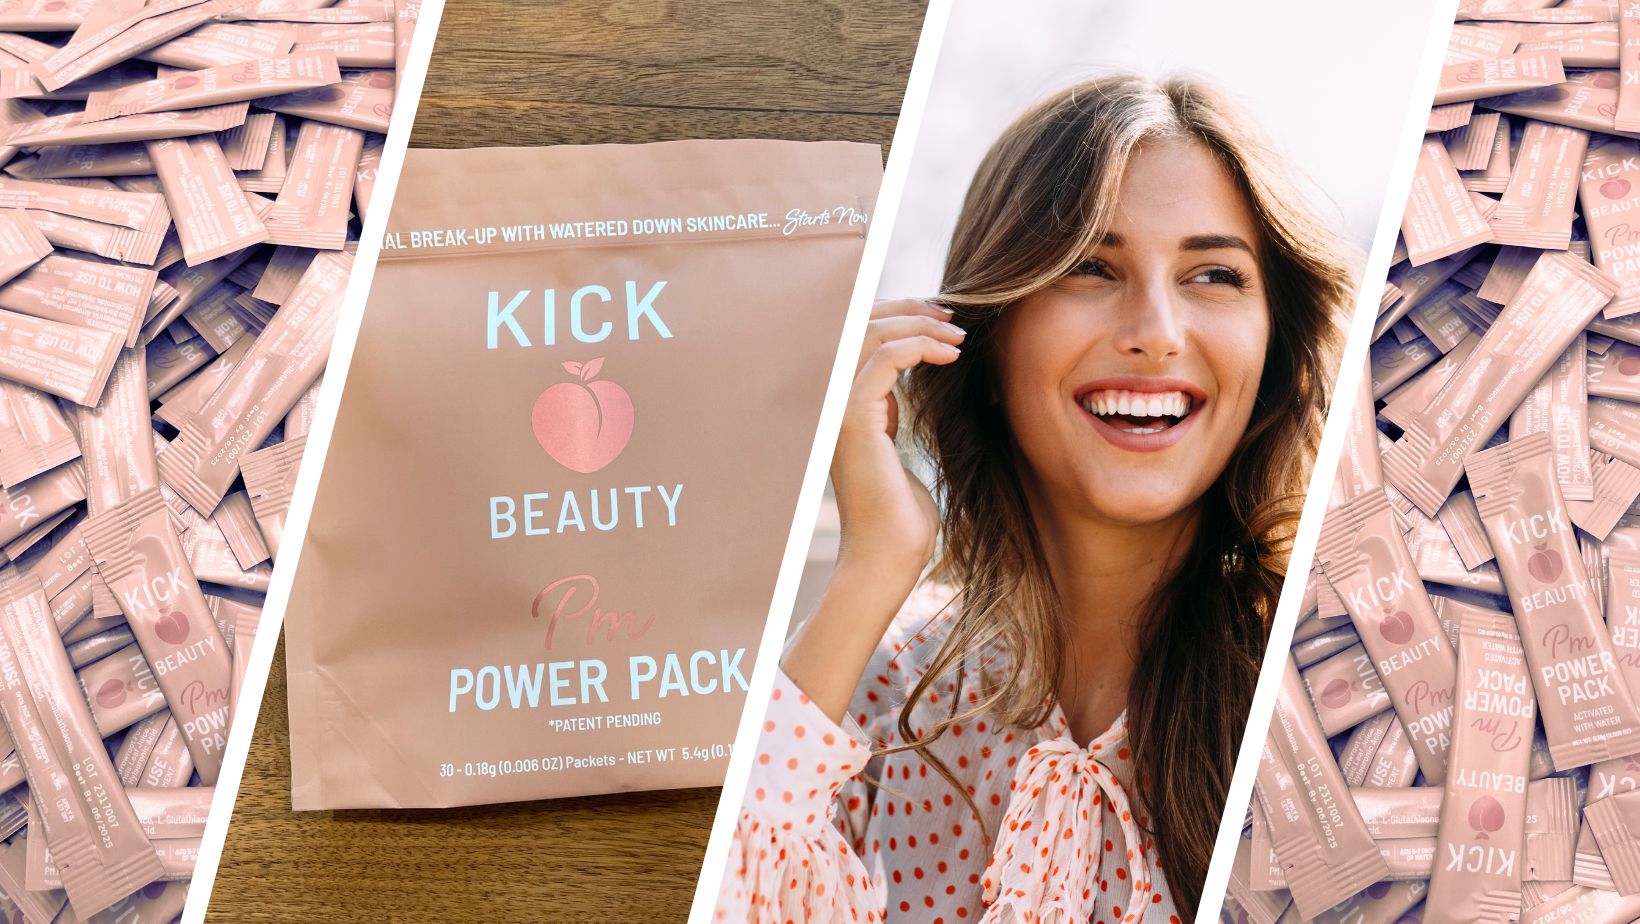 This image contains a split image with stick packs of the PM POWER PACK on either end, a flat lay image of the 30-day bag, and a woman in a white and orange polka-dot shirt smiling.  This image represents the product image with lifestyle of using a clean, waterless skincare treatment.